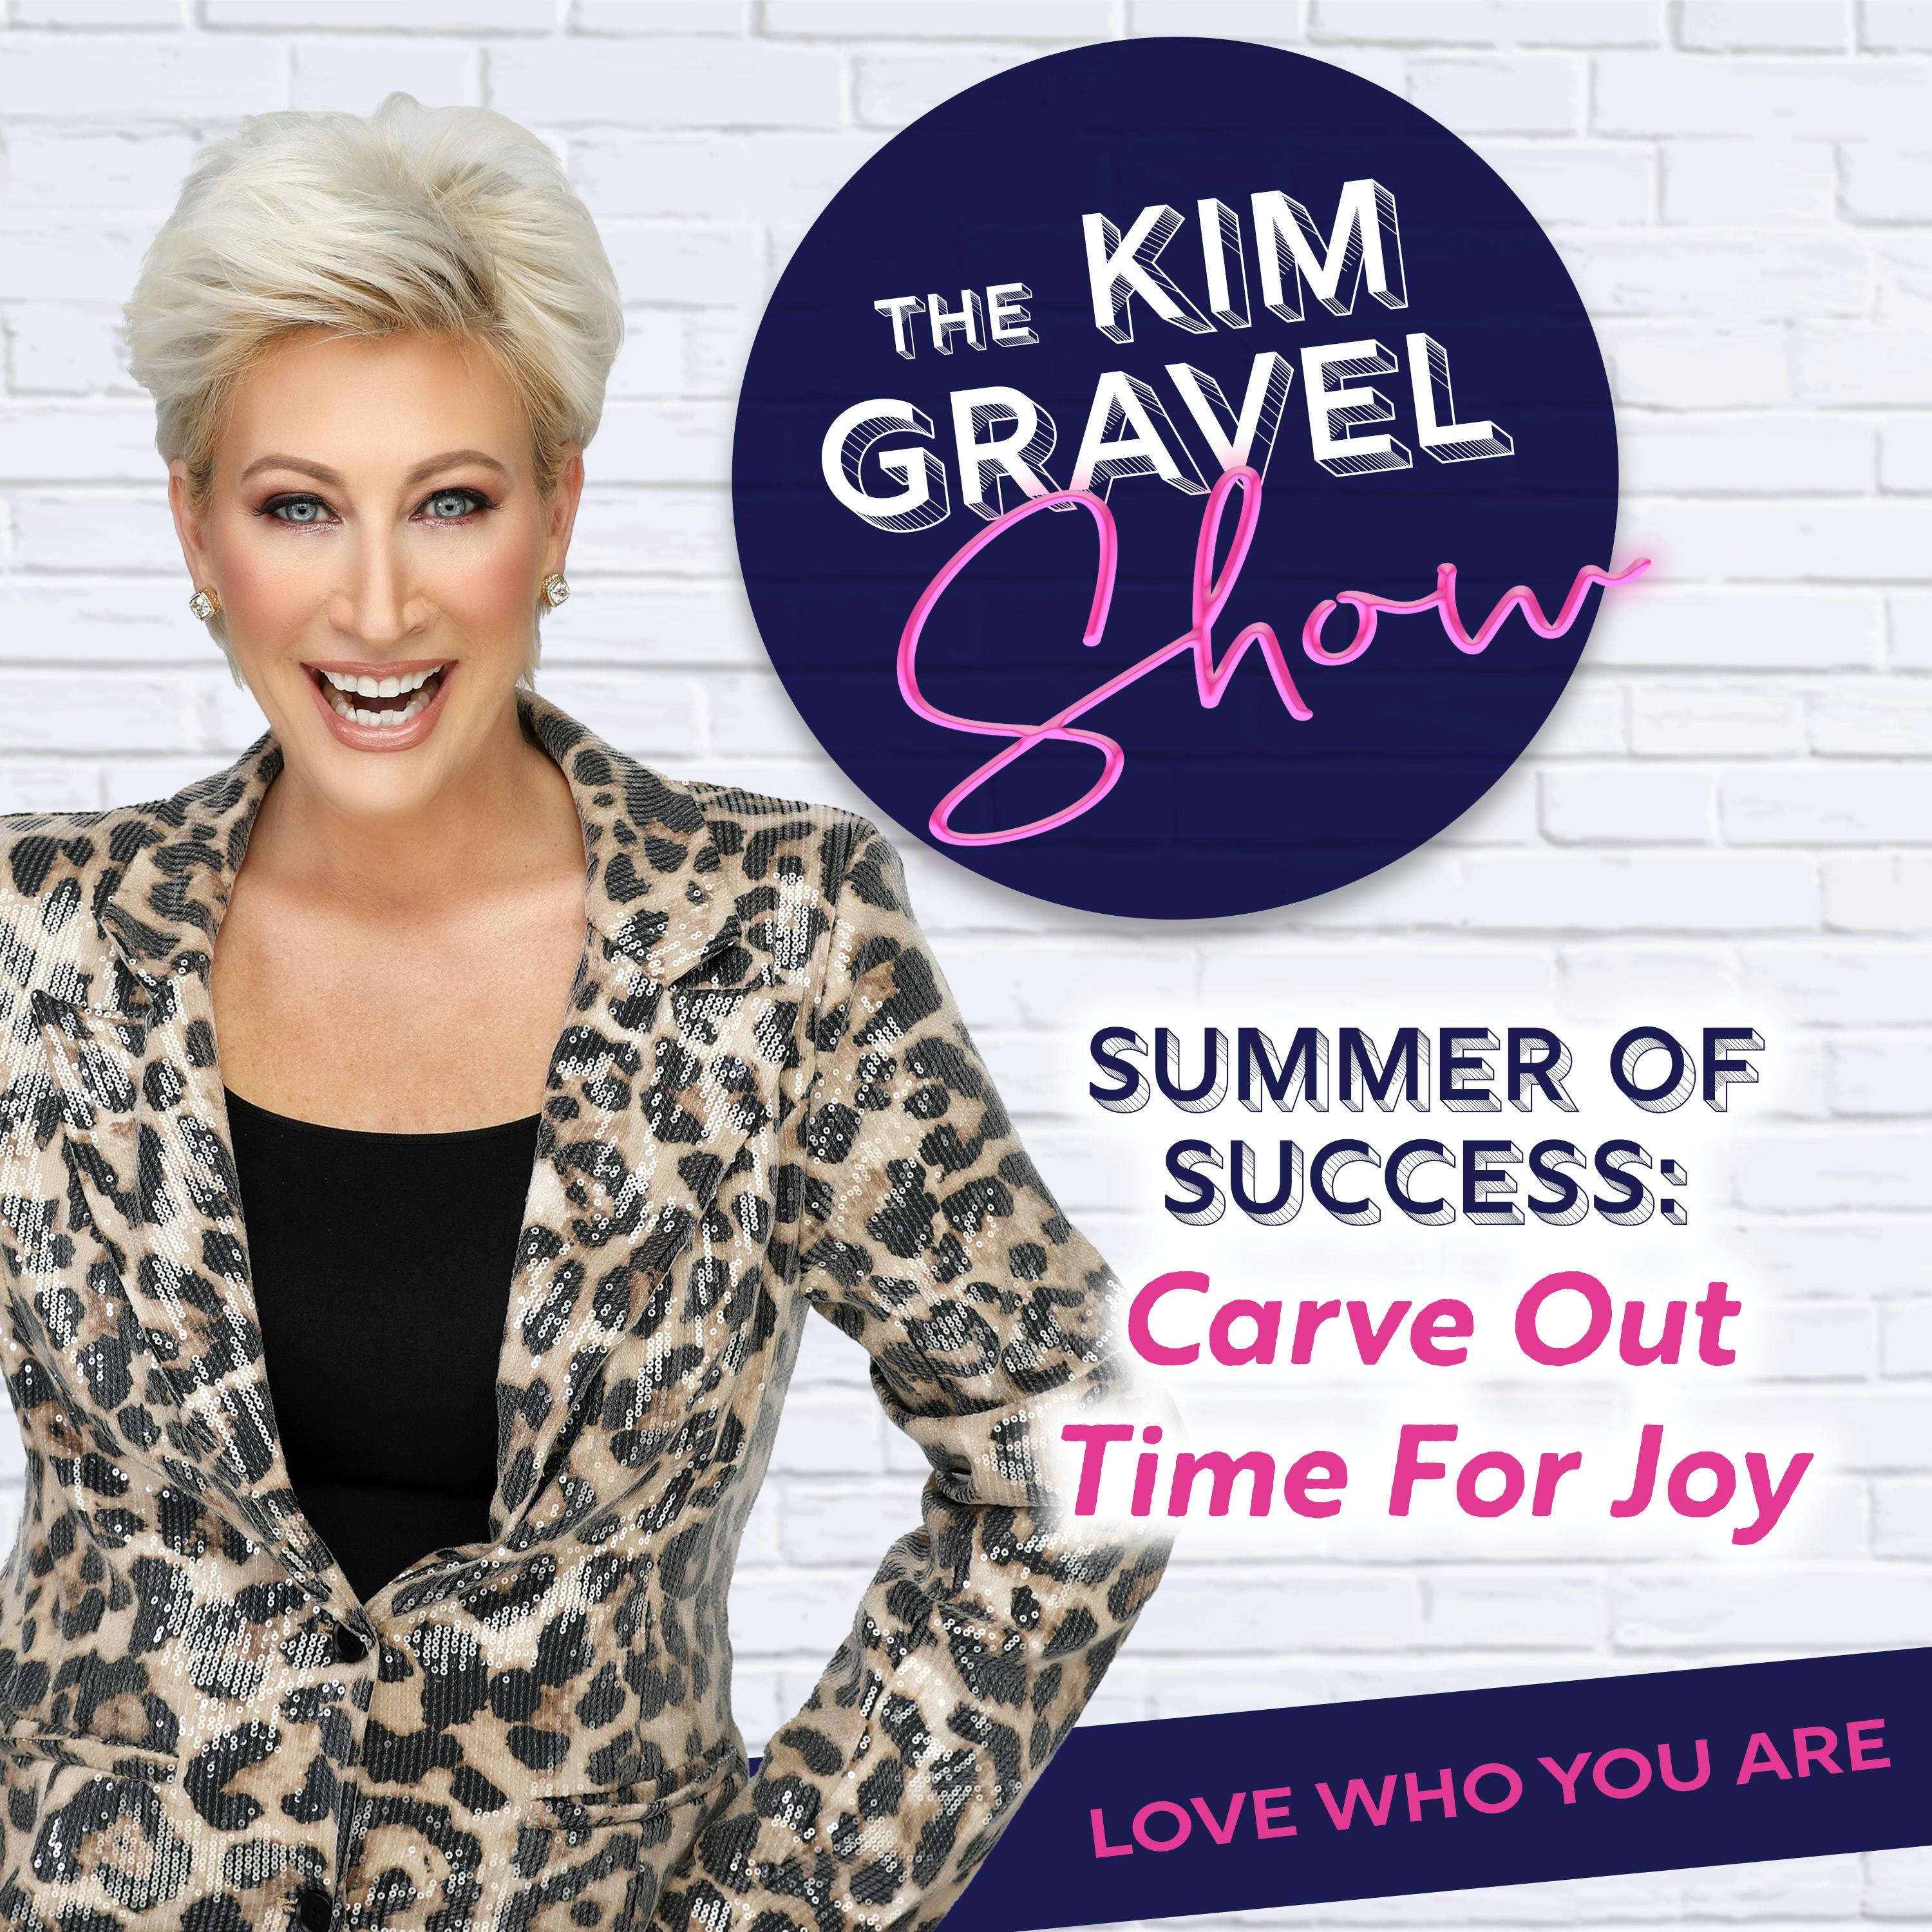 Summer of Success: Carve Out Time For Joy